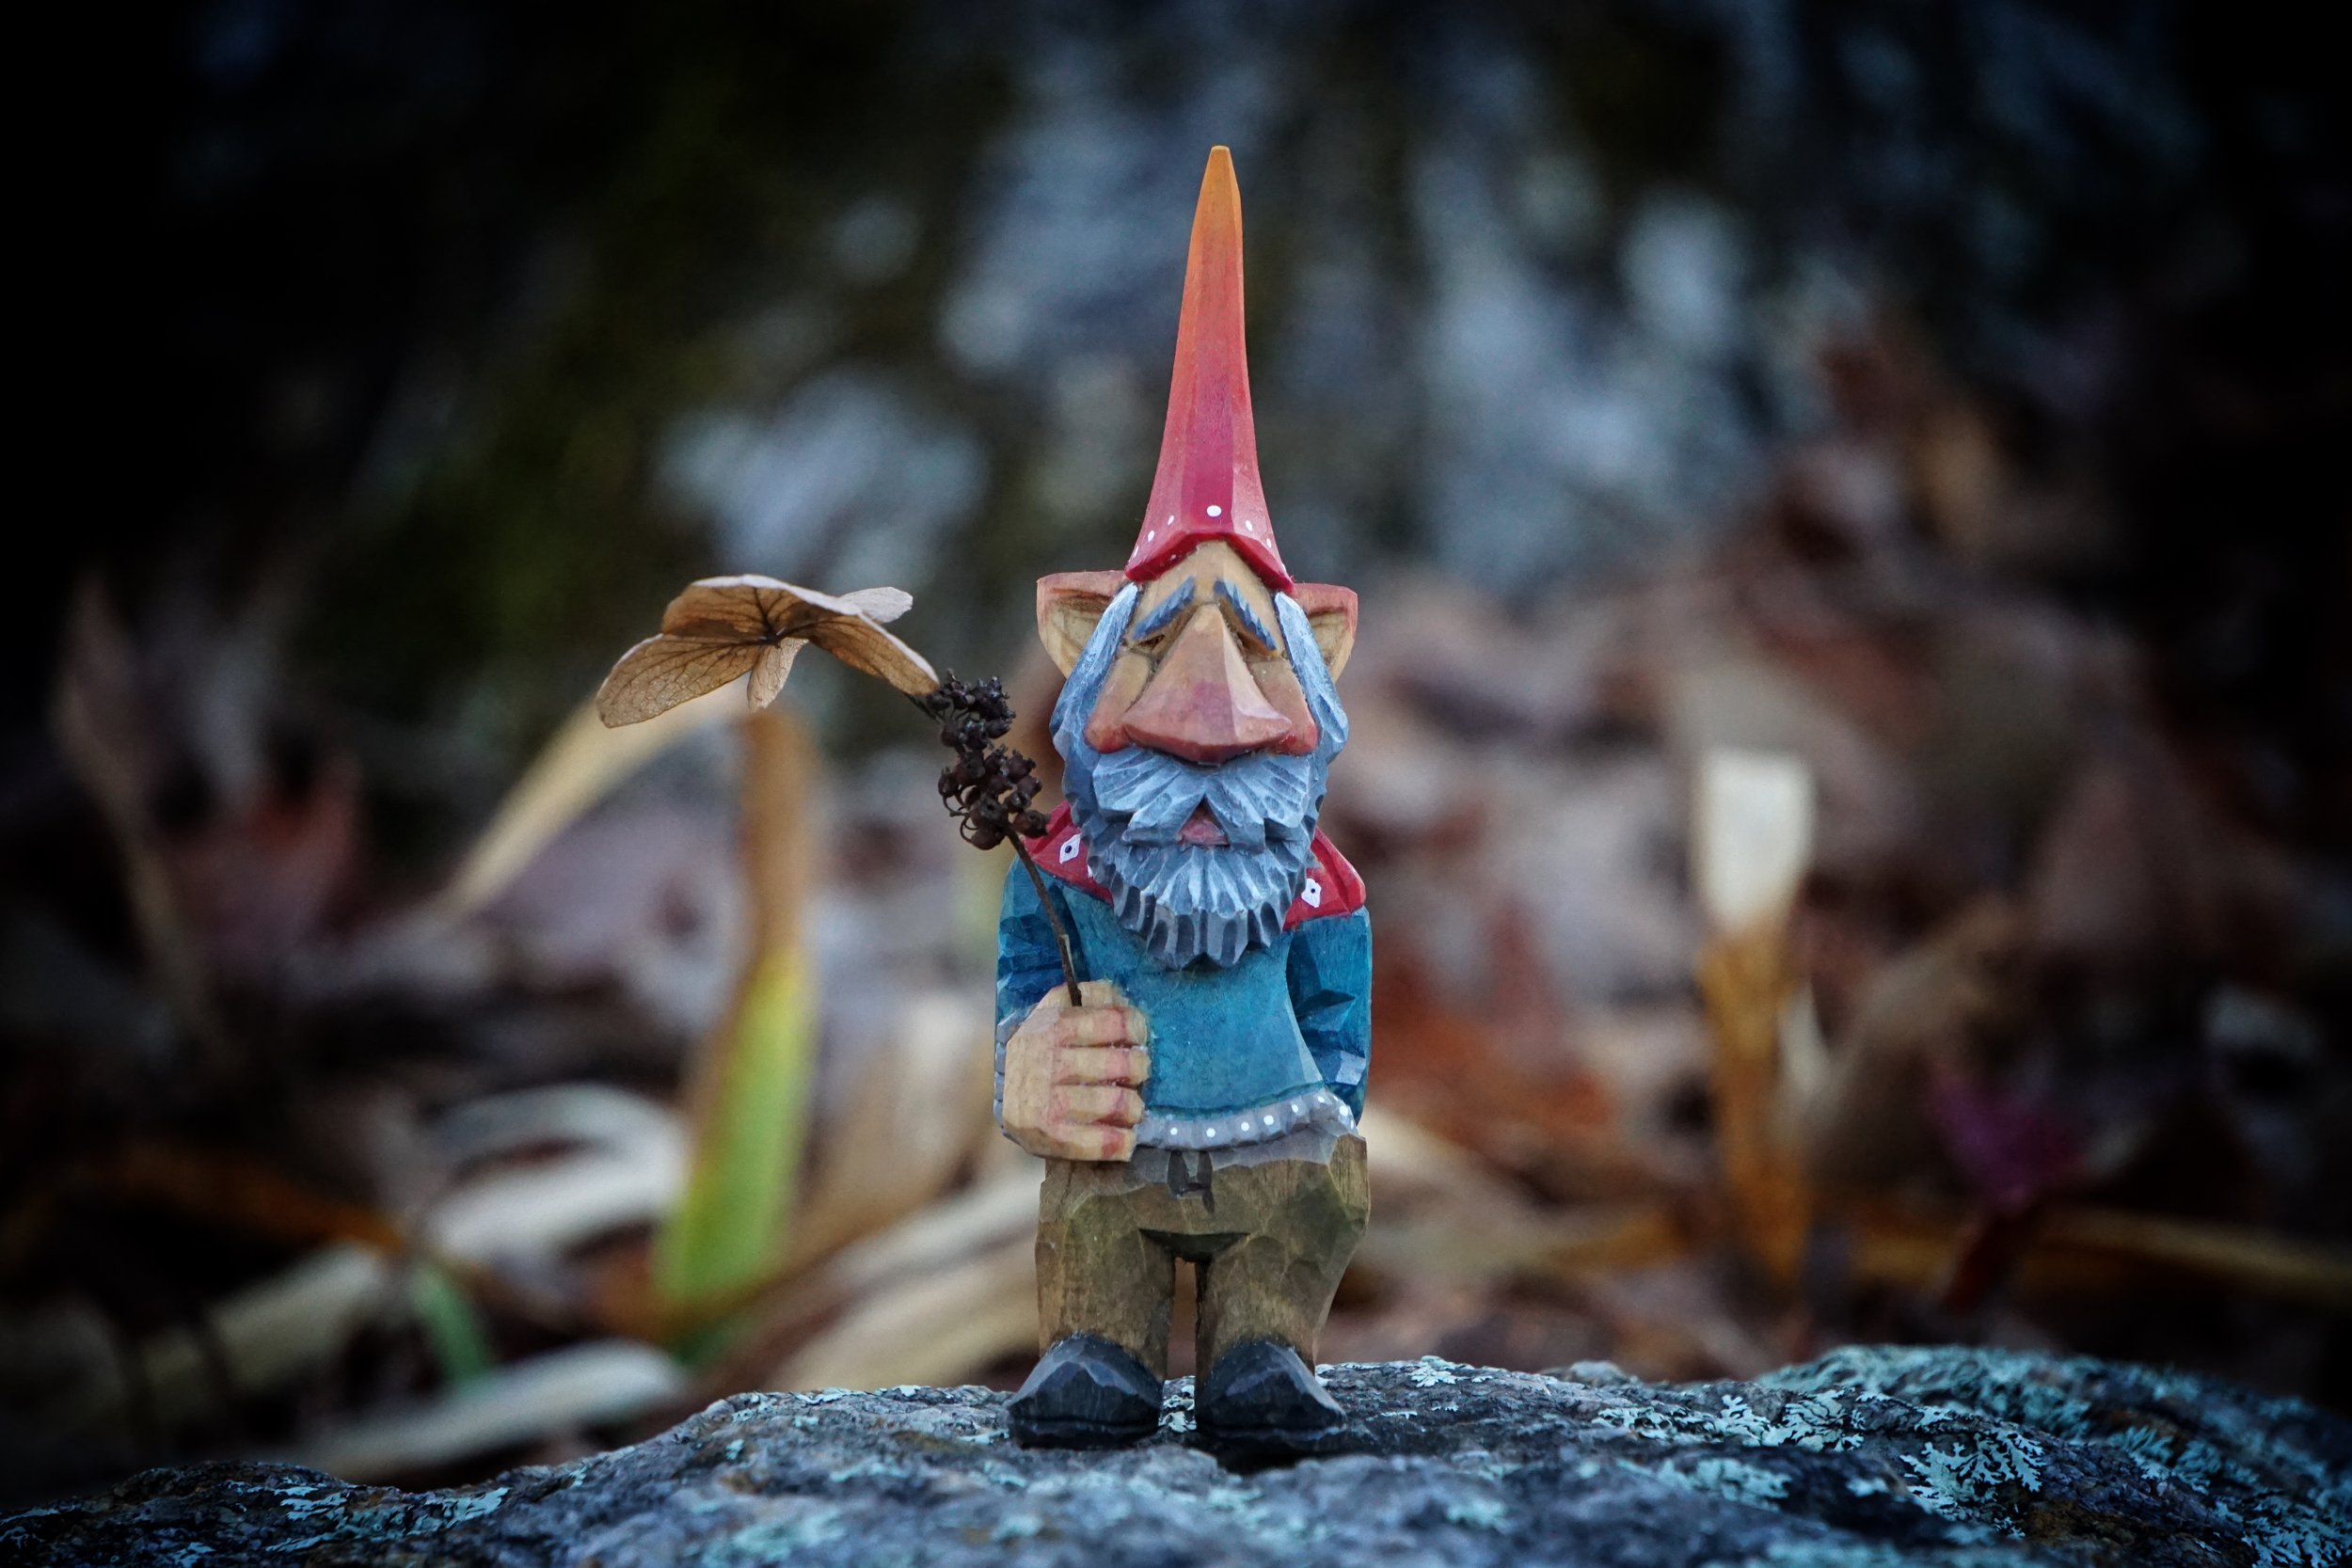 Peter’s Gnome